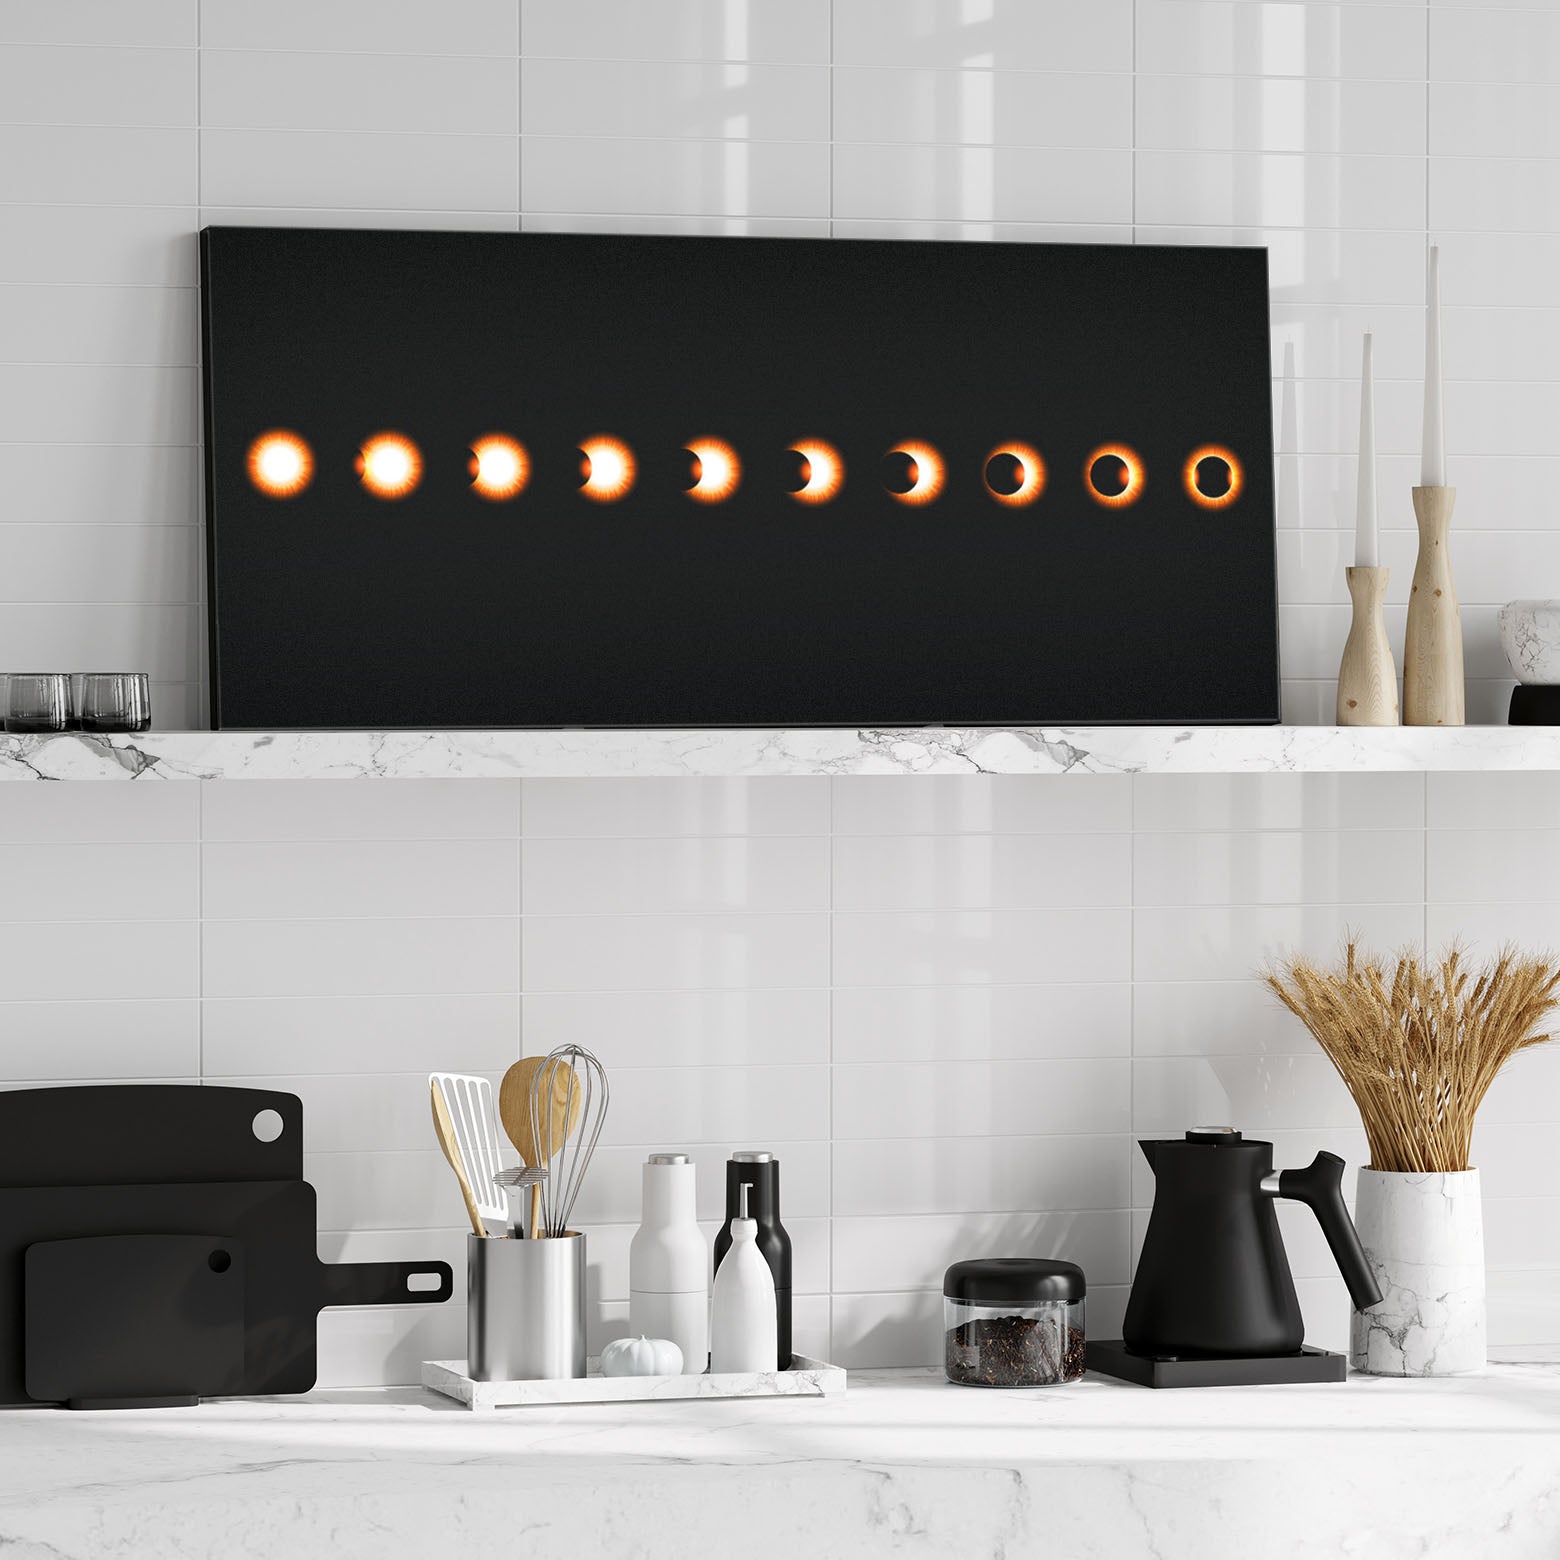 Canvas Print of Solar Eclipse Photo Displayed on the Wall